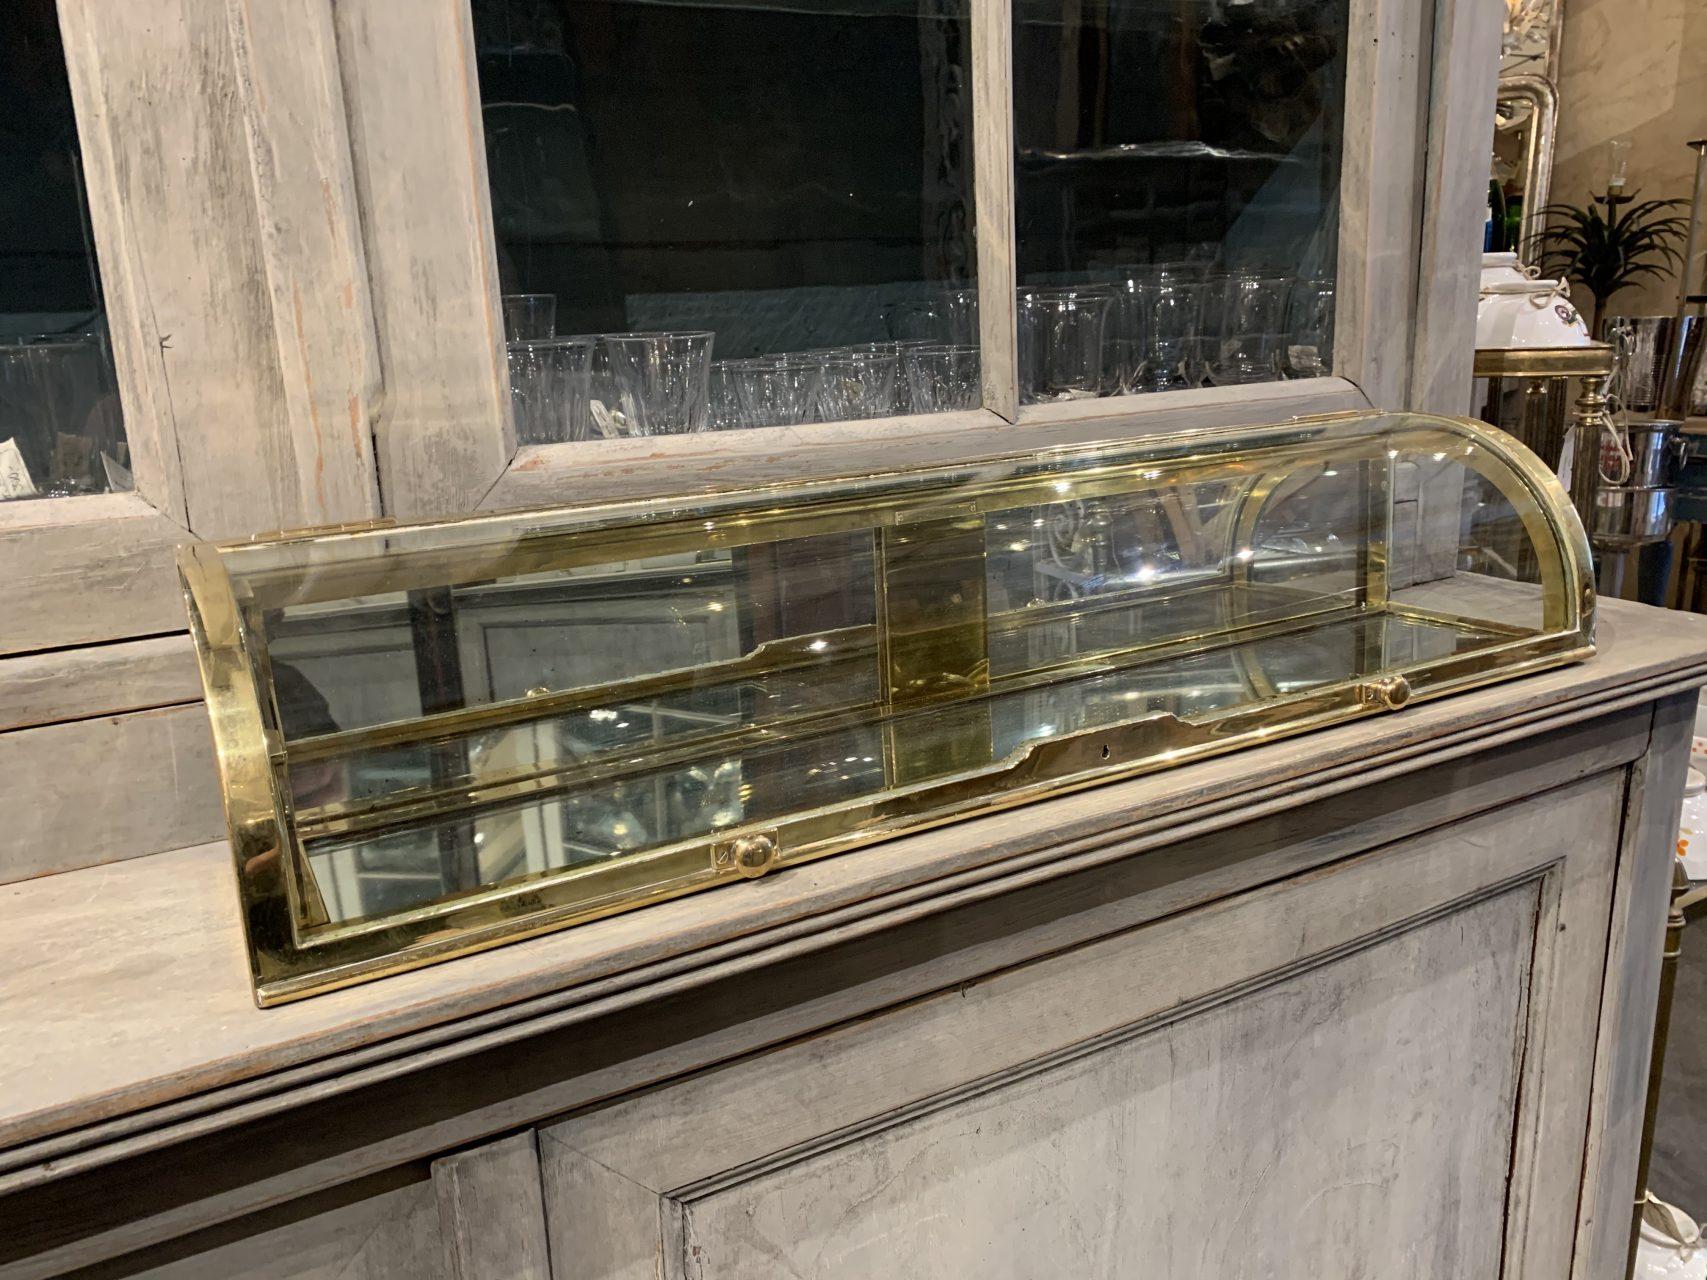 Coveted and most presentable antique French brass table montre, from circa 1880-1890. Elegantly curved glass lid and mirrored glass cladding. Gorgeous handsome profile. The display case was originally quality boutique inventory, and is in super